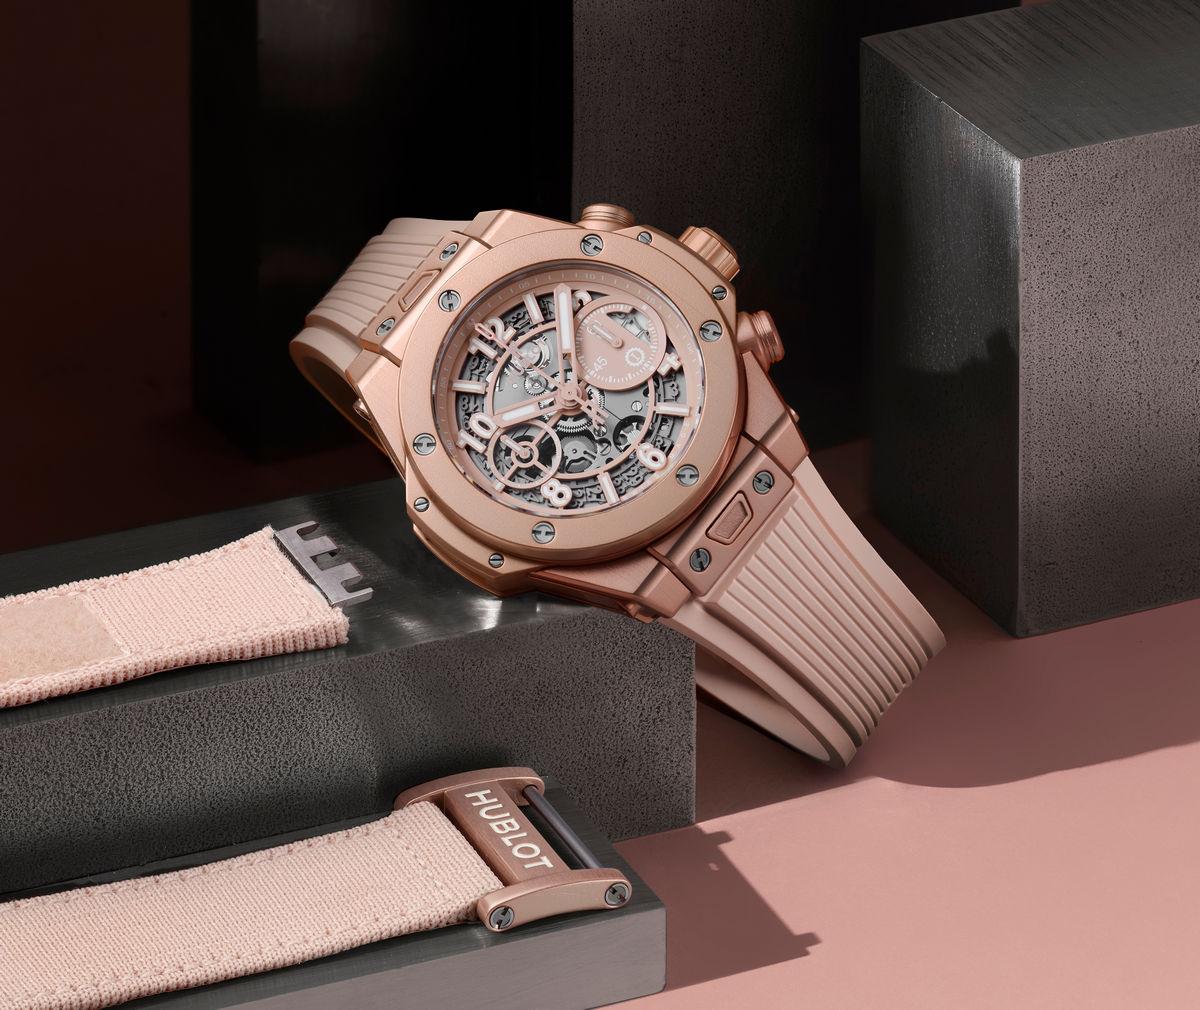 The Hublot Big Bang watch now comes in ‘Millenial pink’